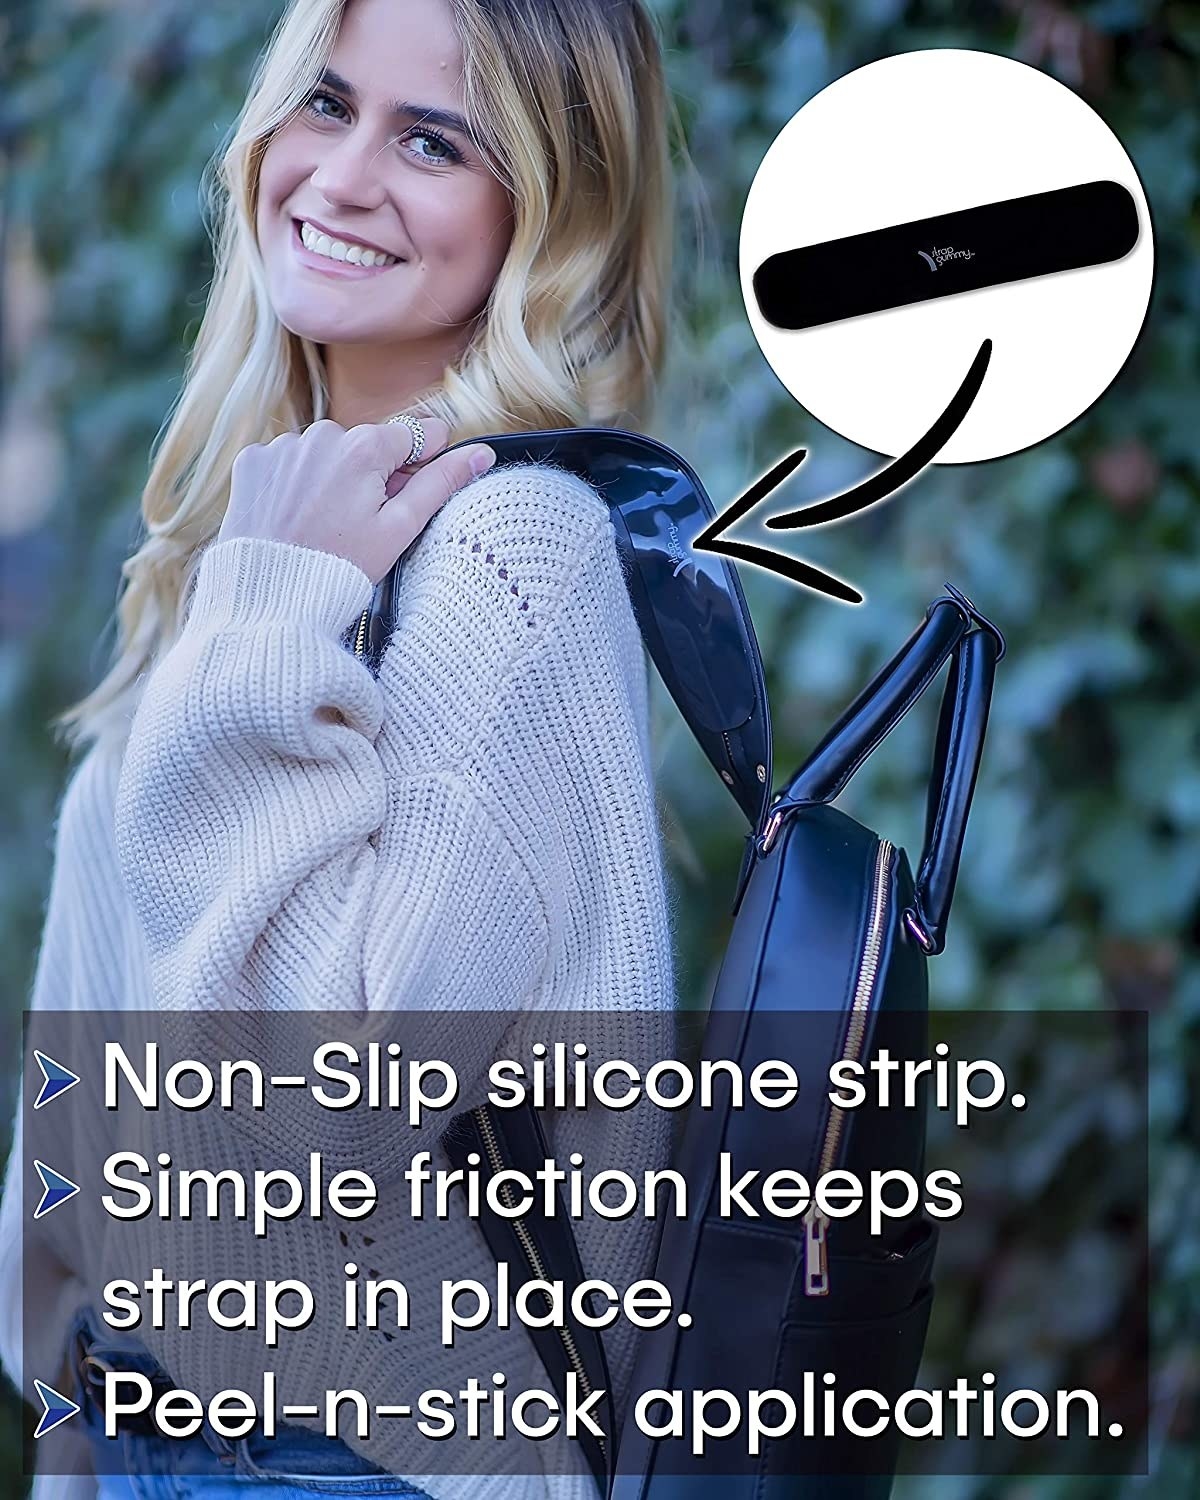 Model wearing a backpack with the silicone strip on the strap